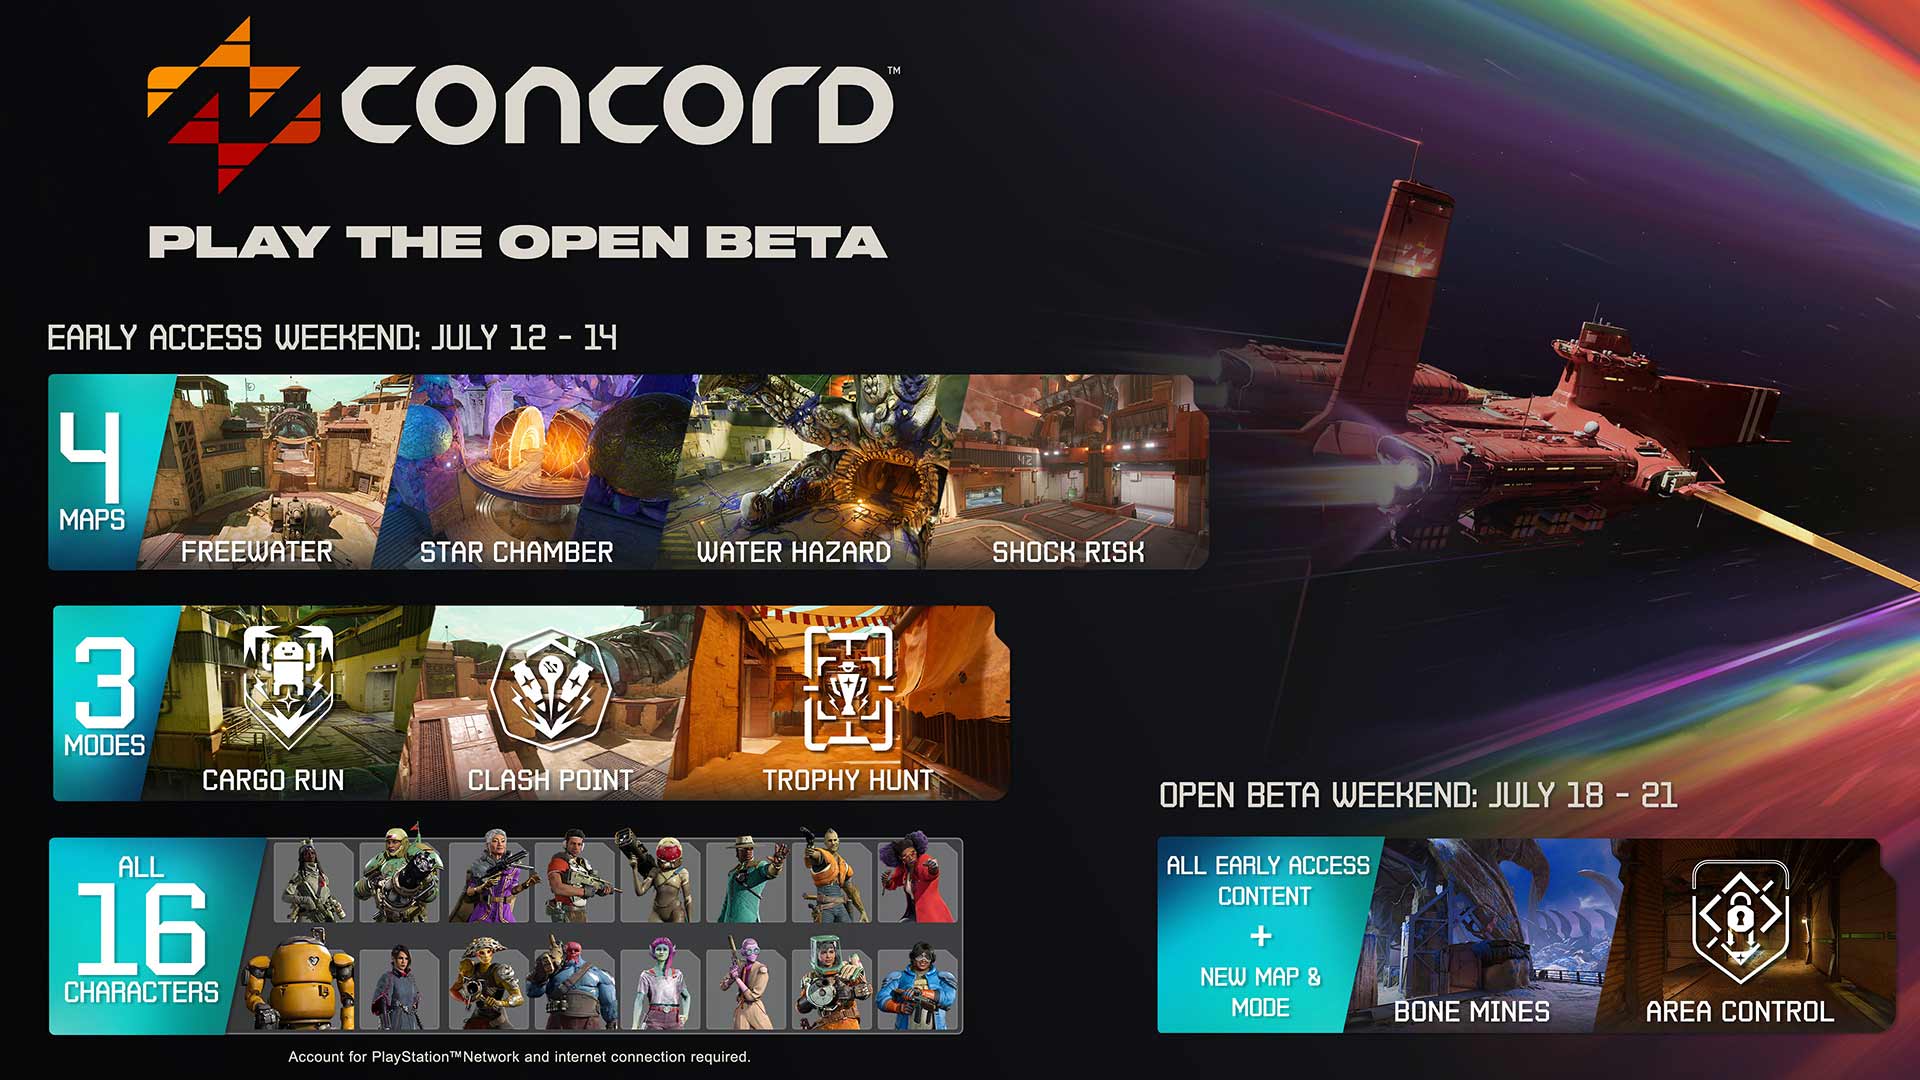 Play the Concord beta and you'll get rewards at launch